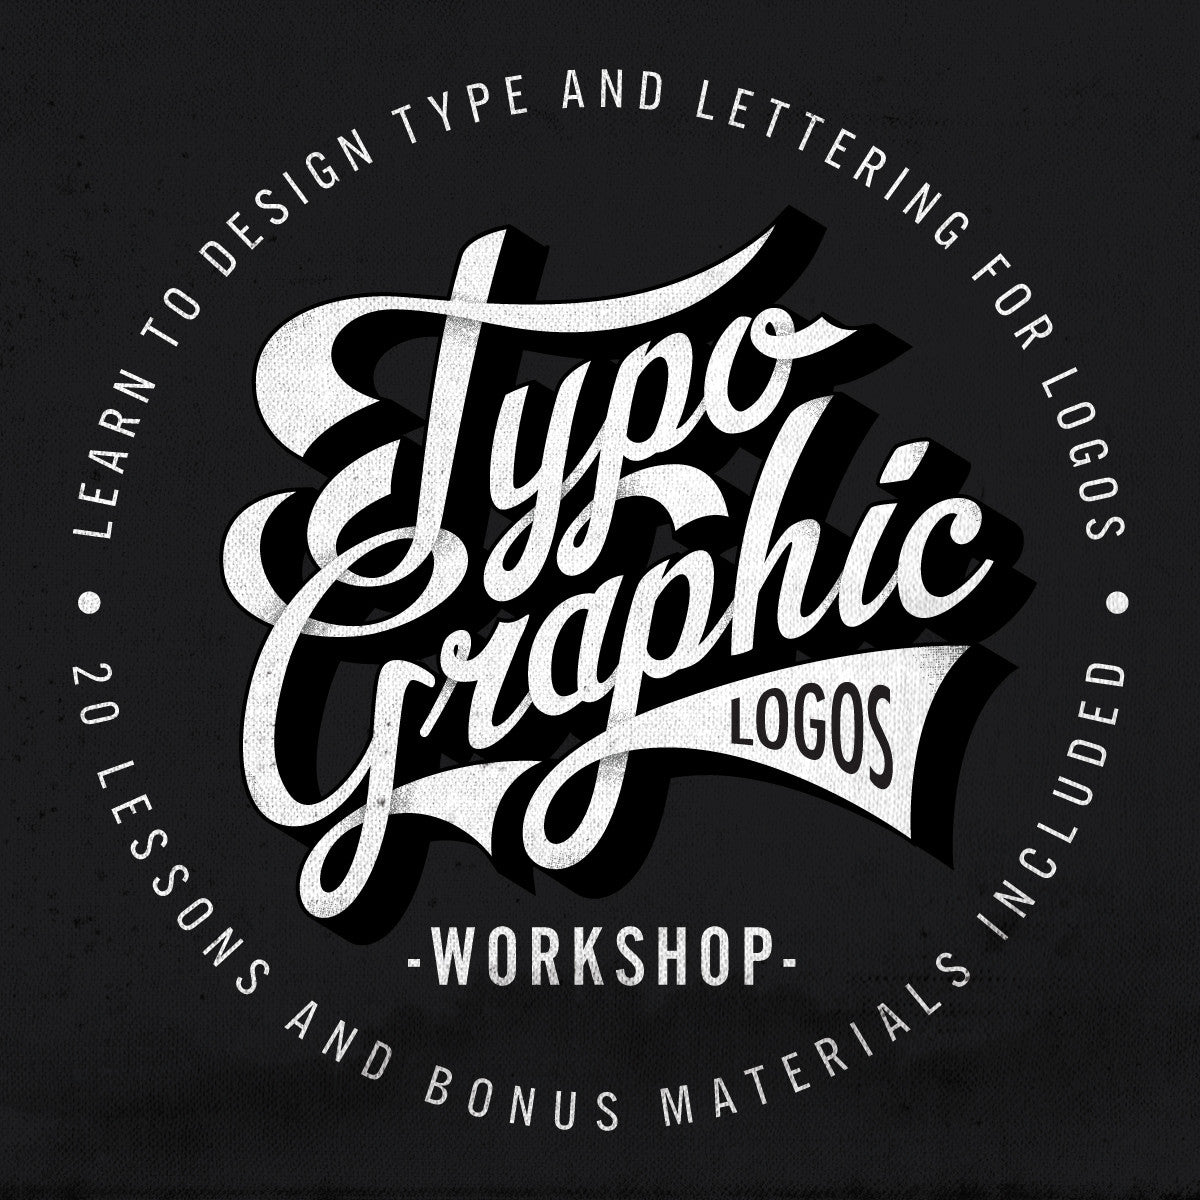 Typographic Logos Class - Learn Typography and Lettering for Logo Design